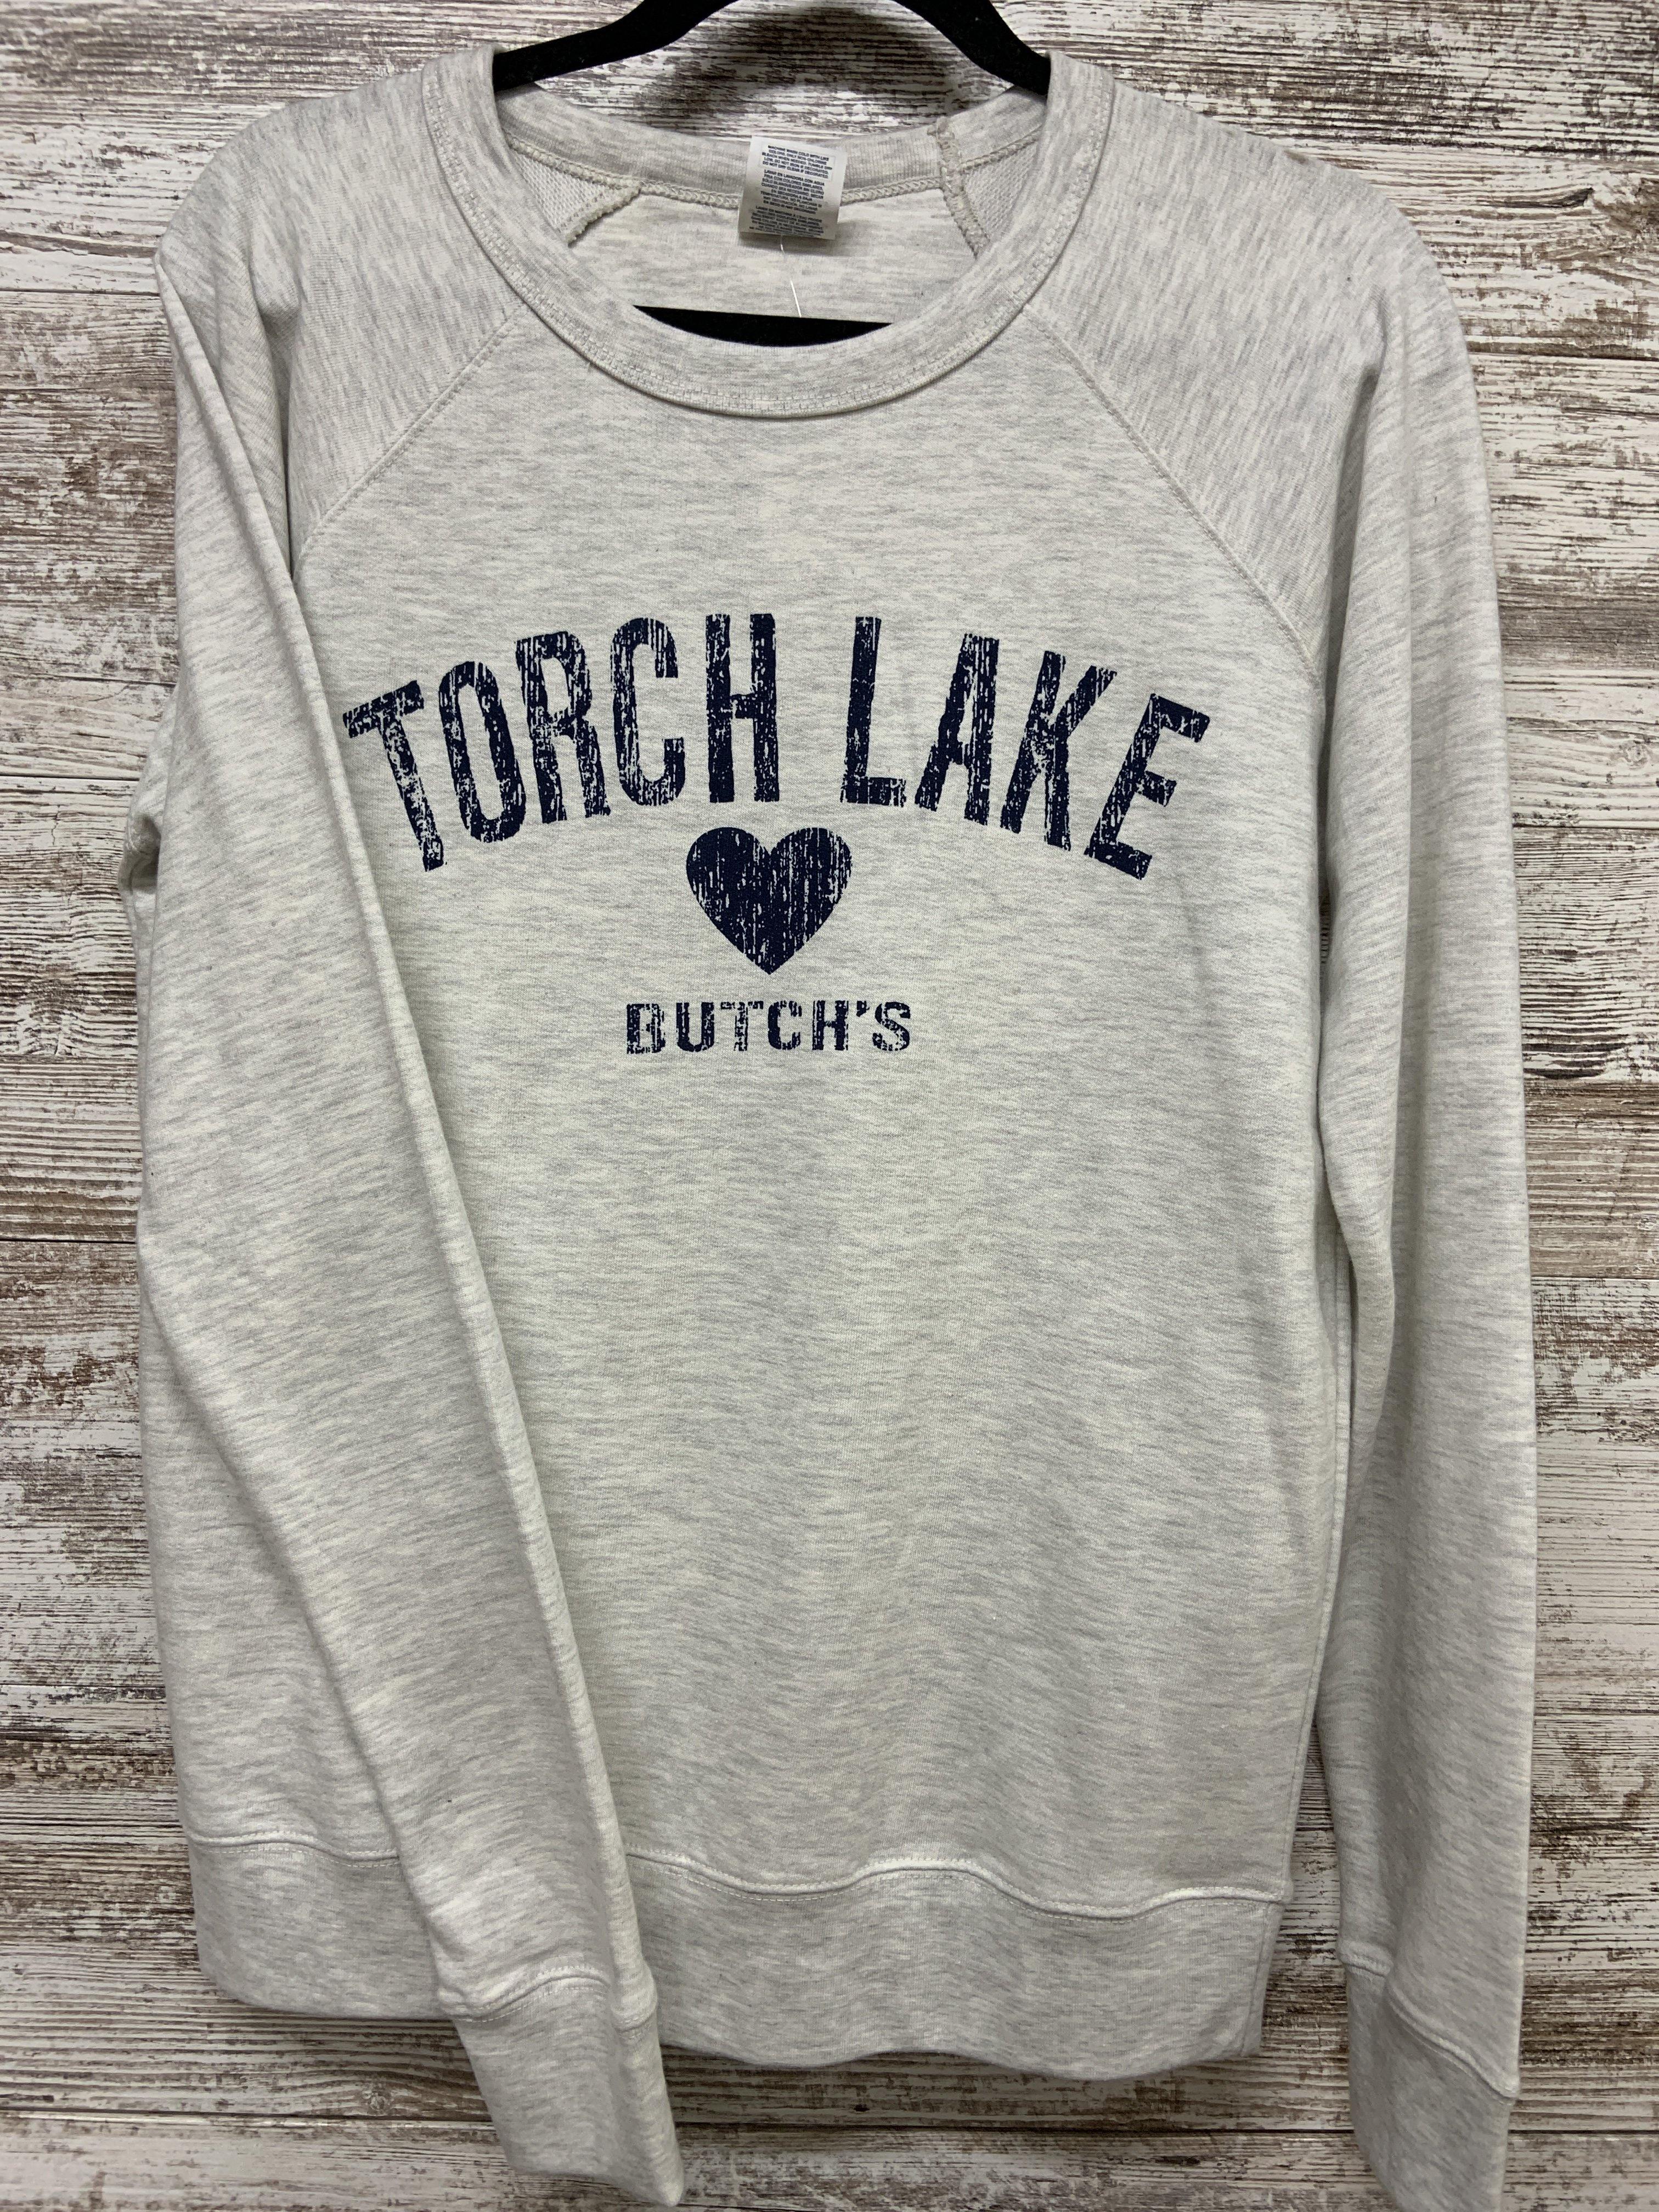 Columbia Torch Lake Vest - Vests - Columbia - Butch's Tackle & Marine -  Torch Lake Apparel, Sweatshirts, Gifts & Tritoon Rentals